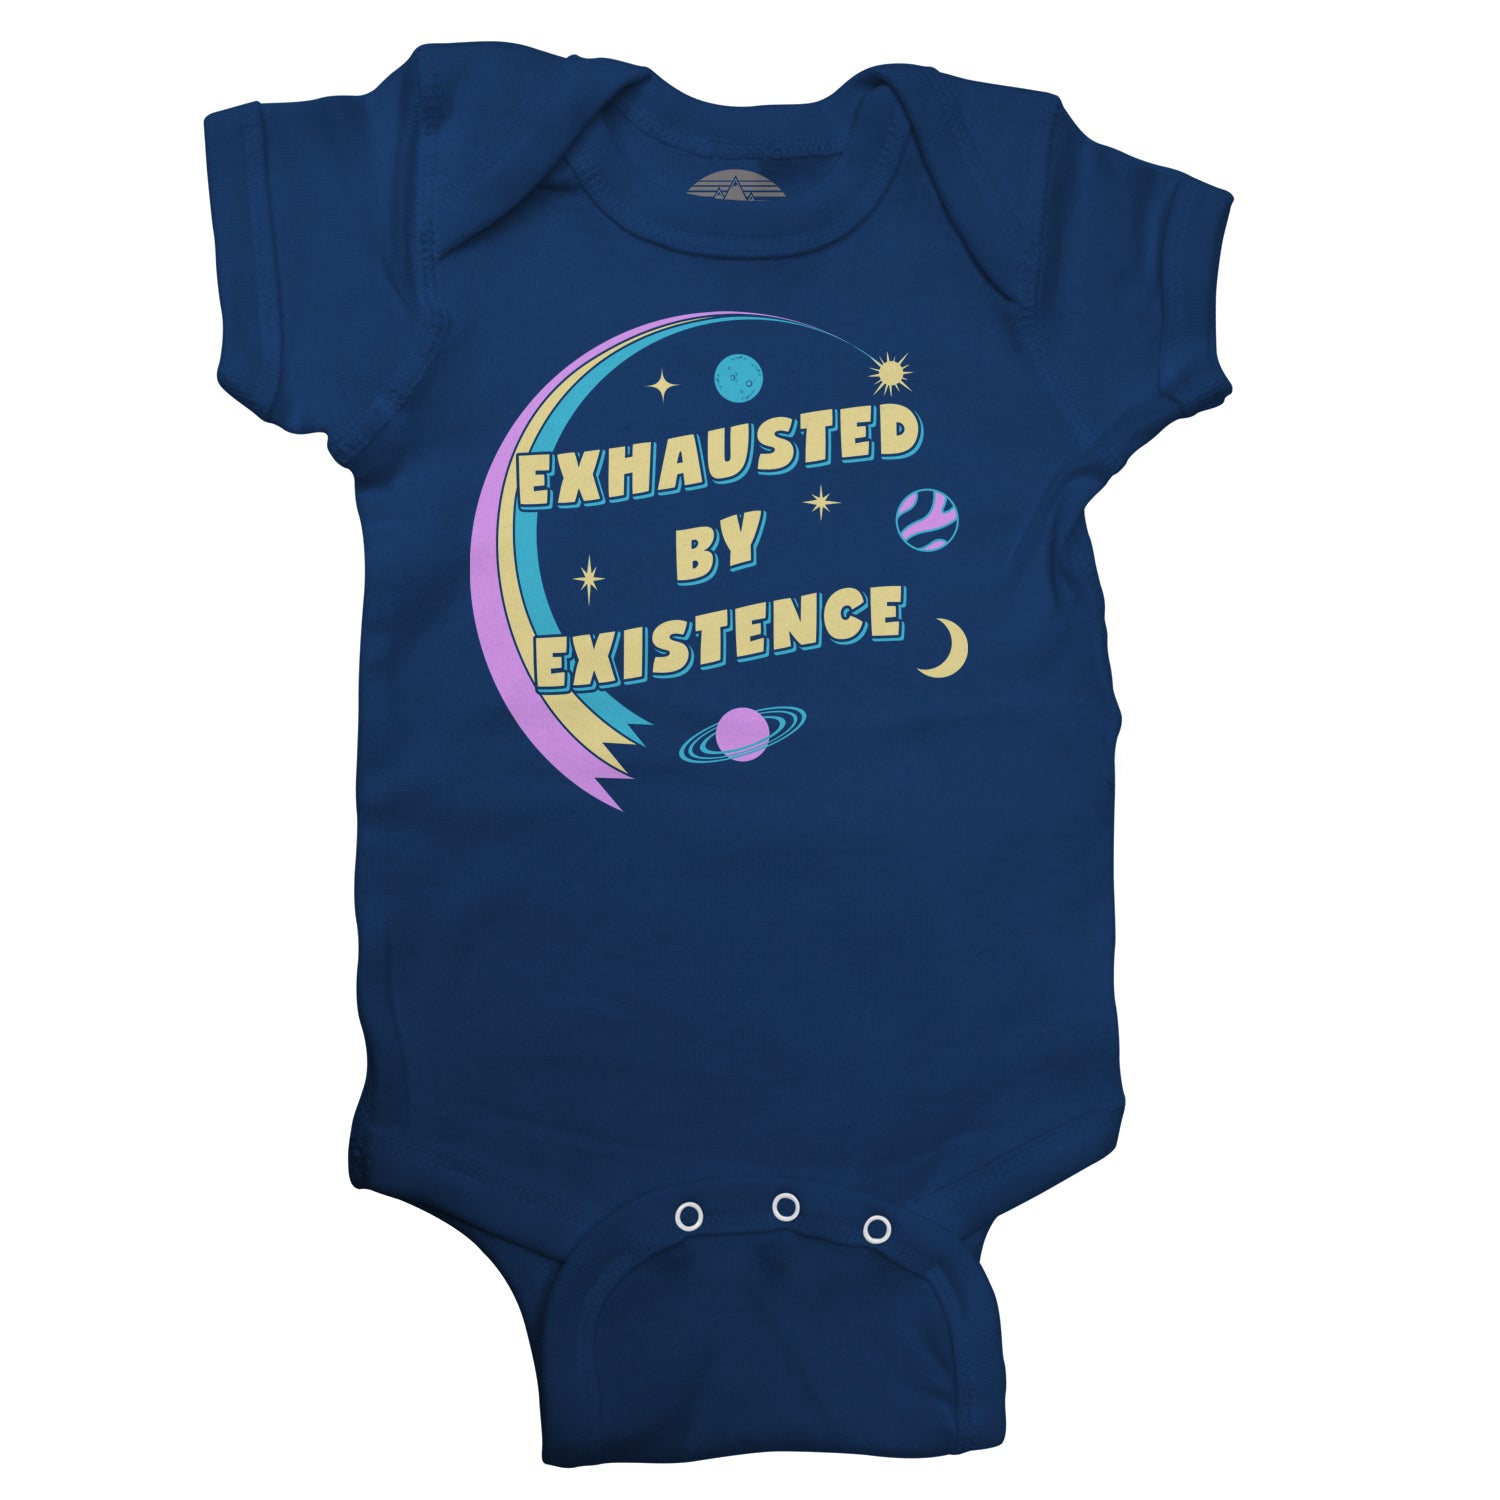 Exhausted By Existence Infant Bodysuit - Unisex Fit